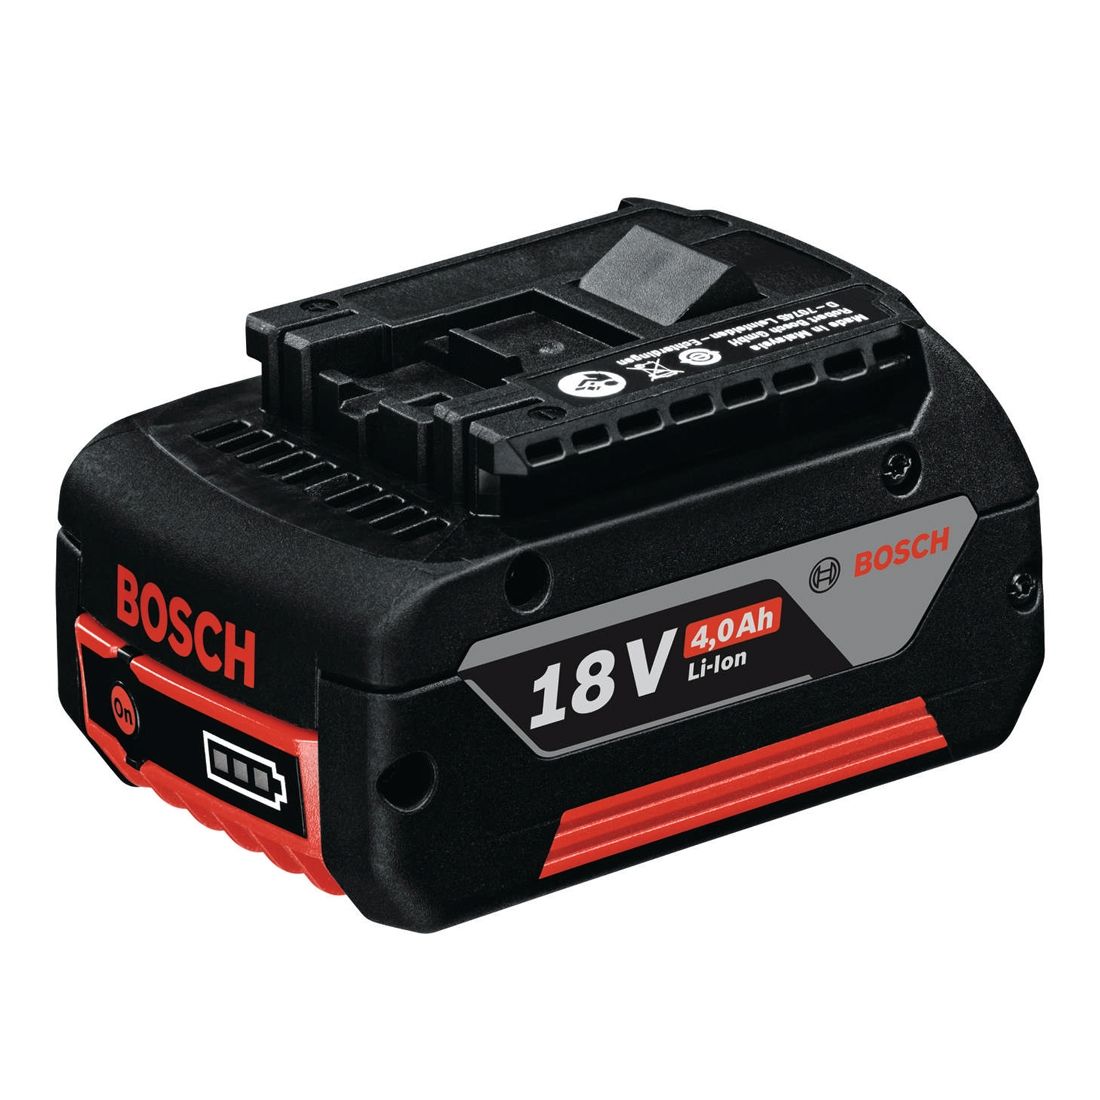 Bosch 1600Z00038 - Professional GBA 18V 4.0 Ah CoolPack Lithium-Ion Battery